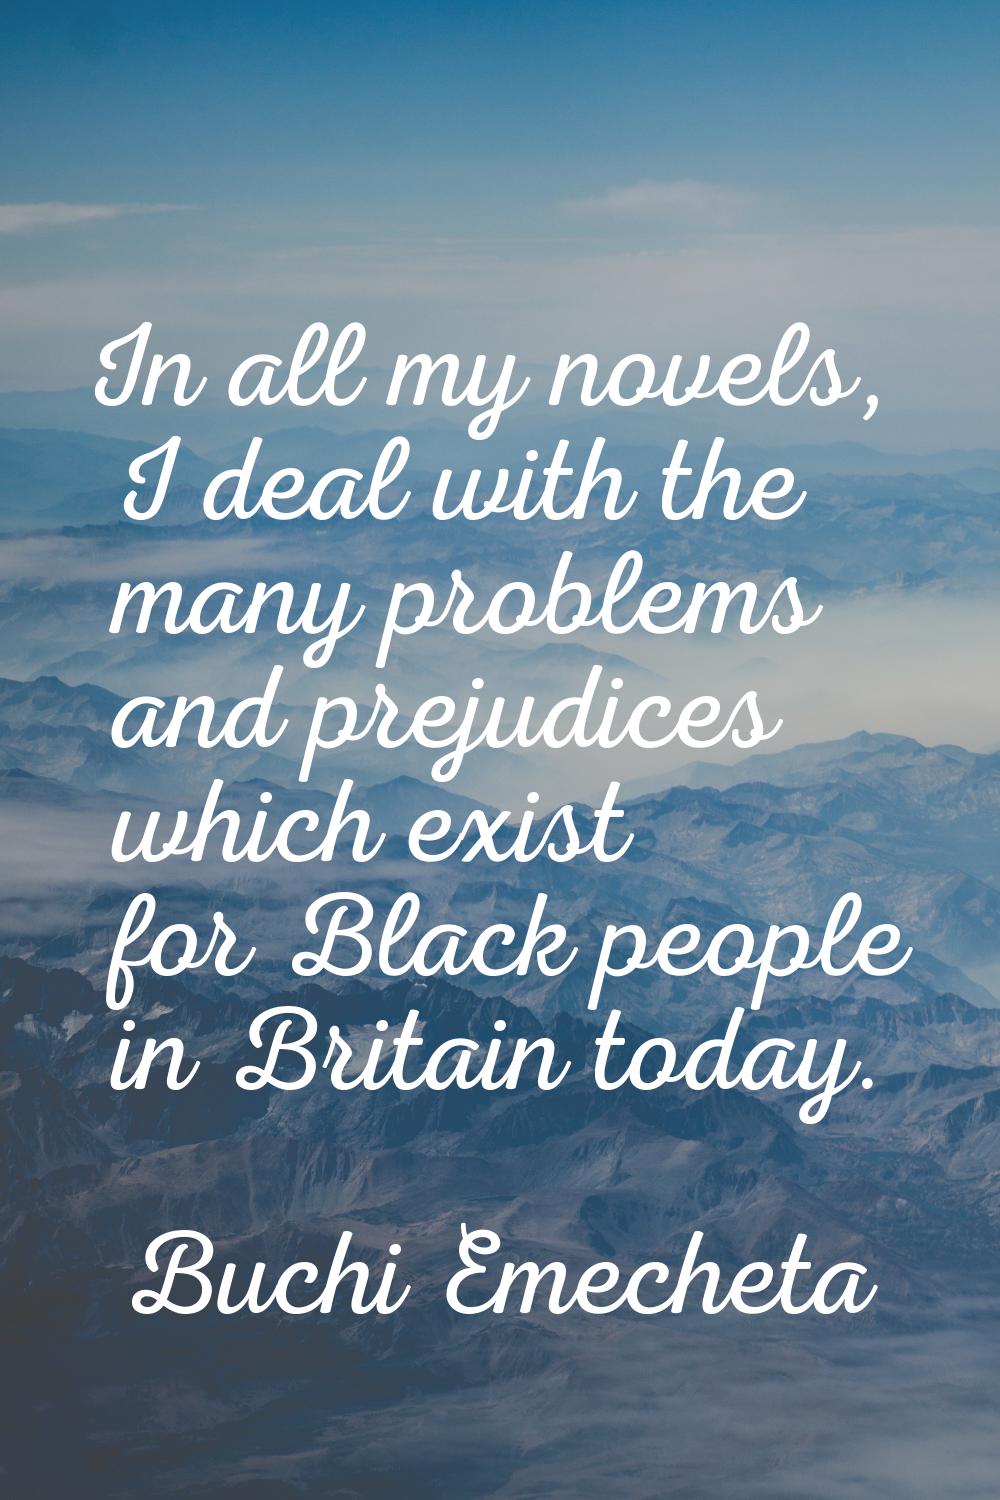 In all my novels, I deal with the many problems and prejudices which exist for Black people in Brit